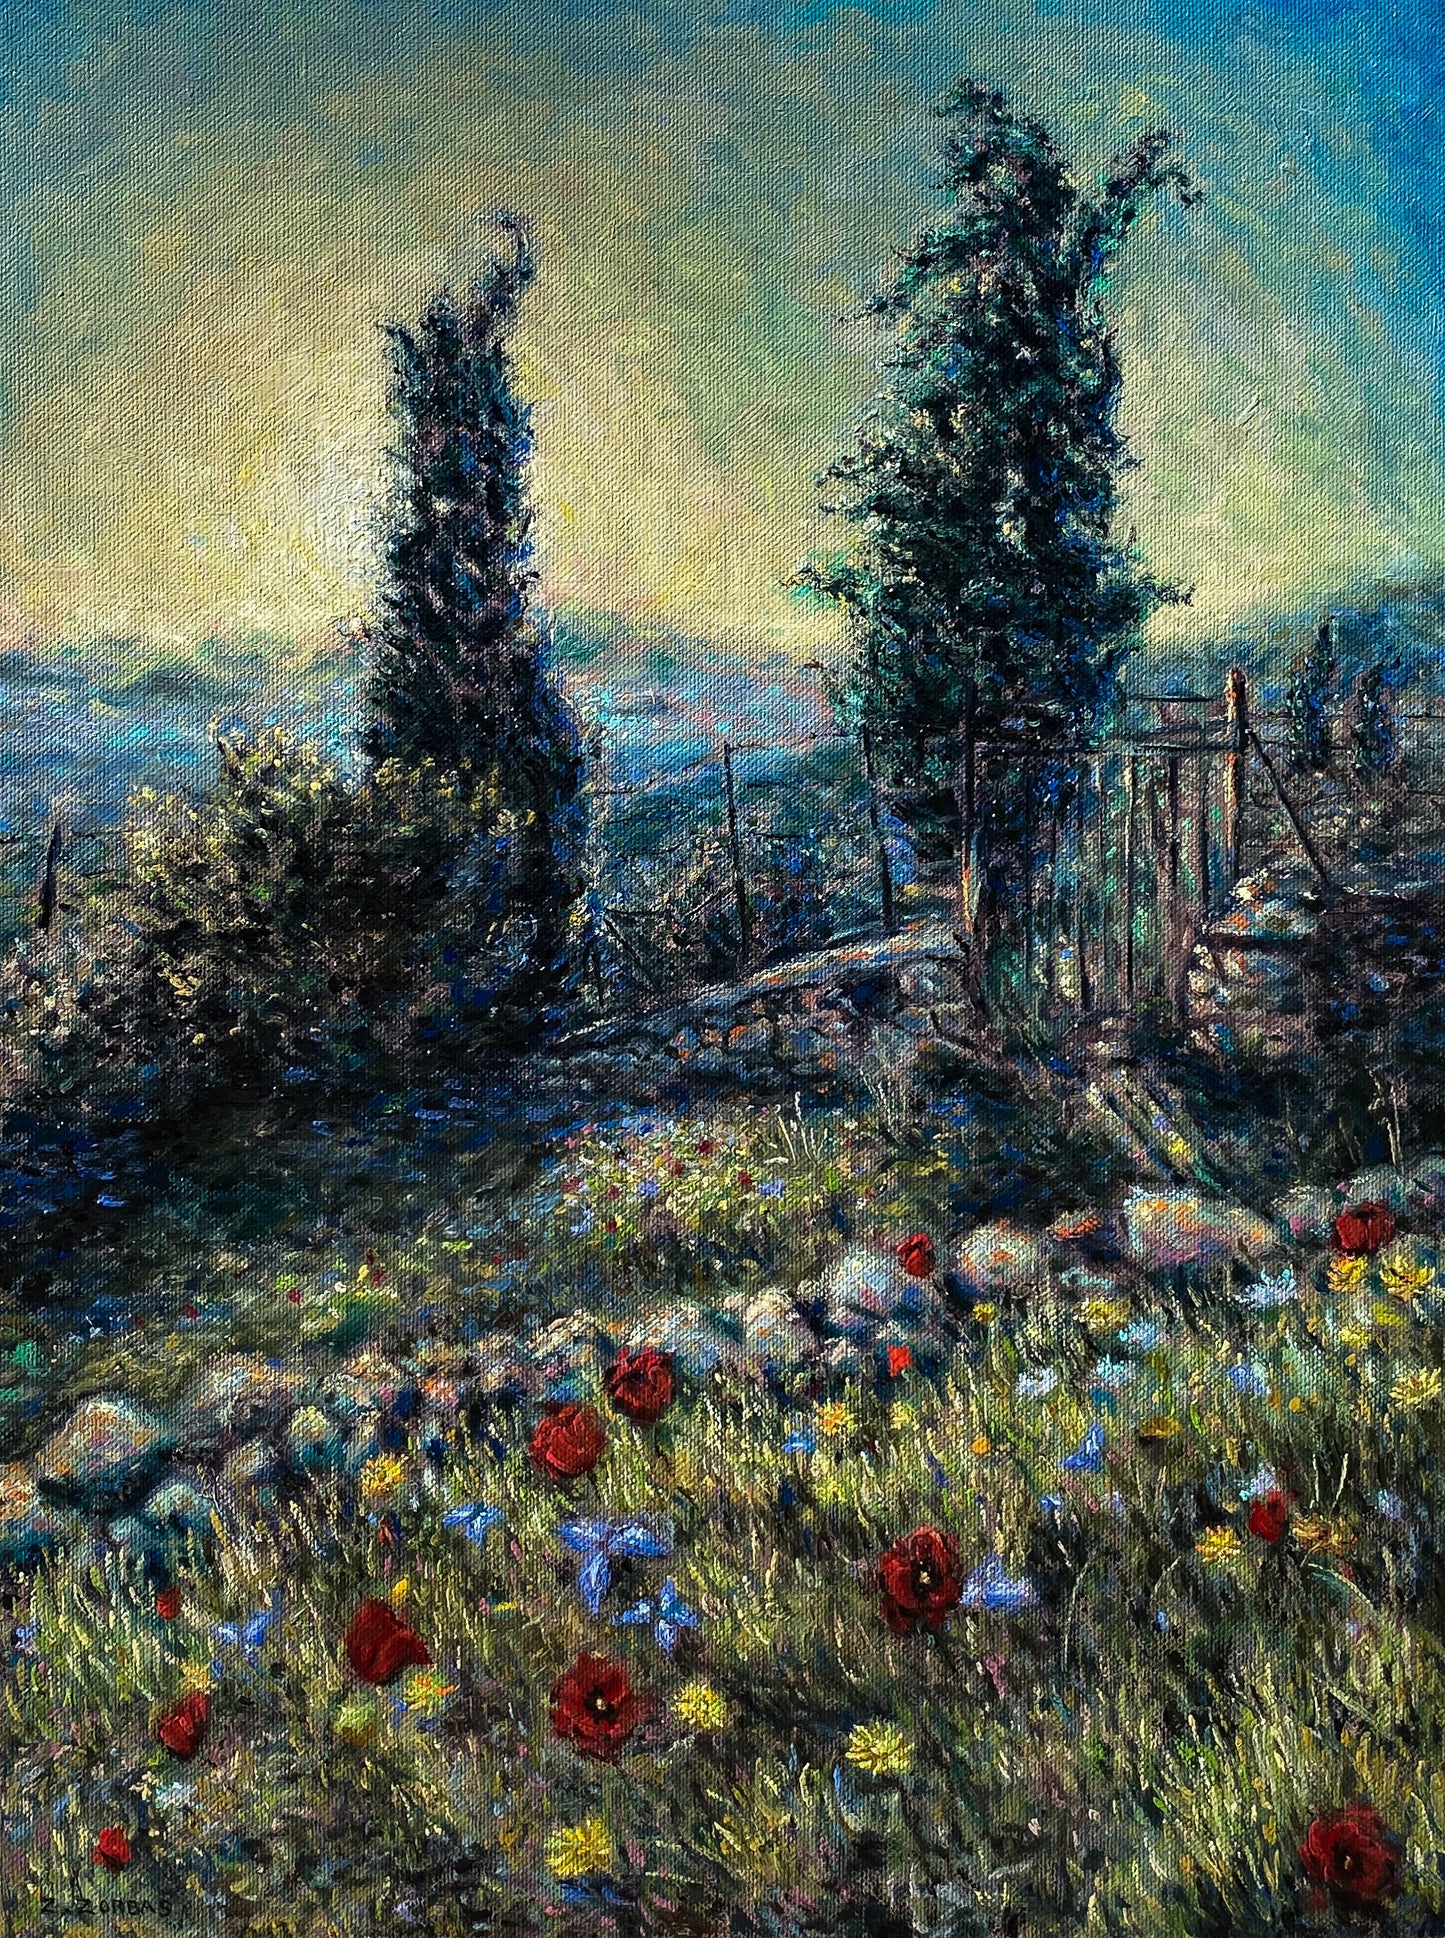 Original Painting: Two Cypresses with Spring Wildflowers in Tzikides Aegina